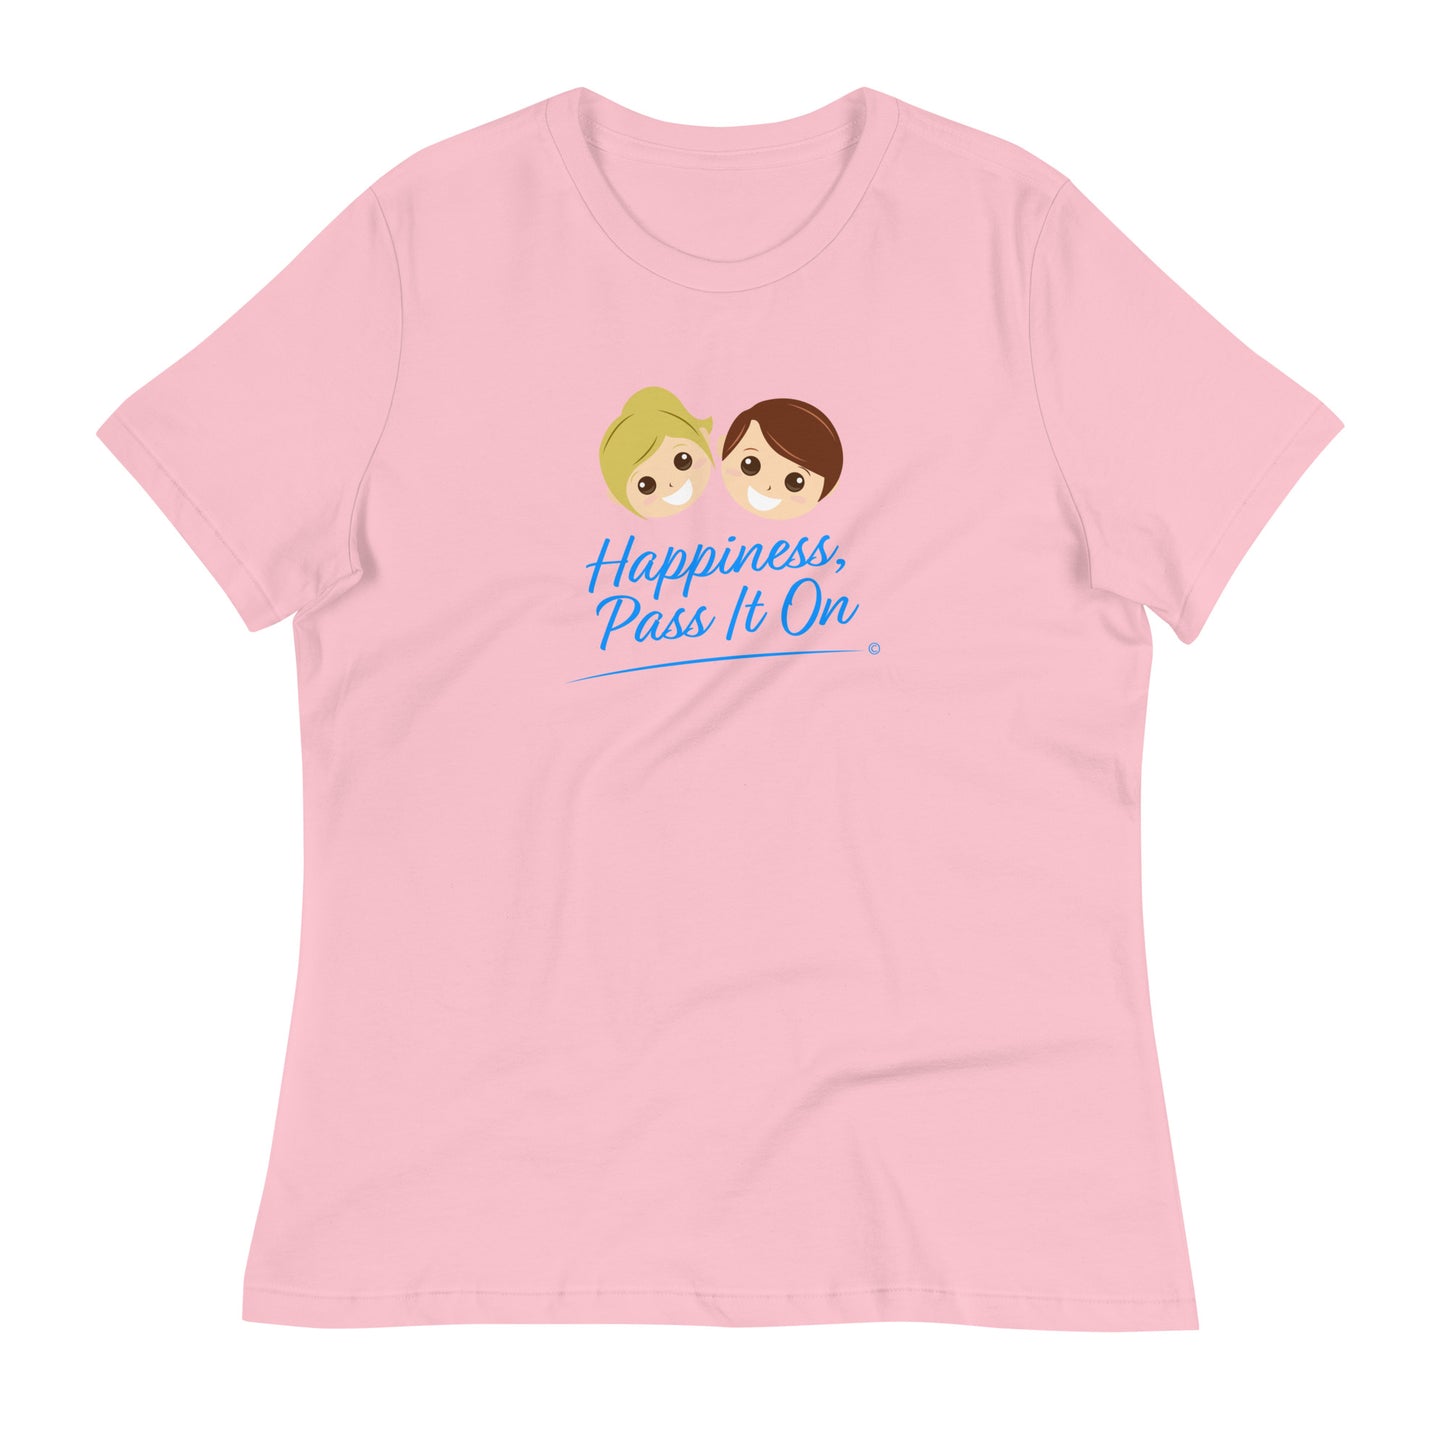 Happiness, Pass It On Women's Tees